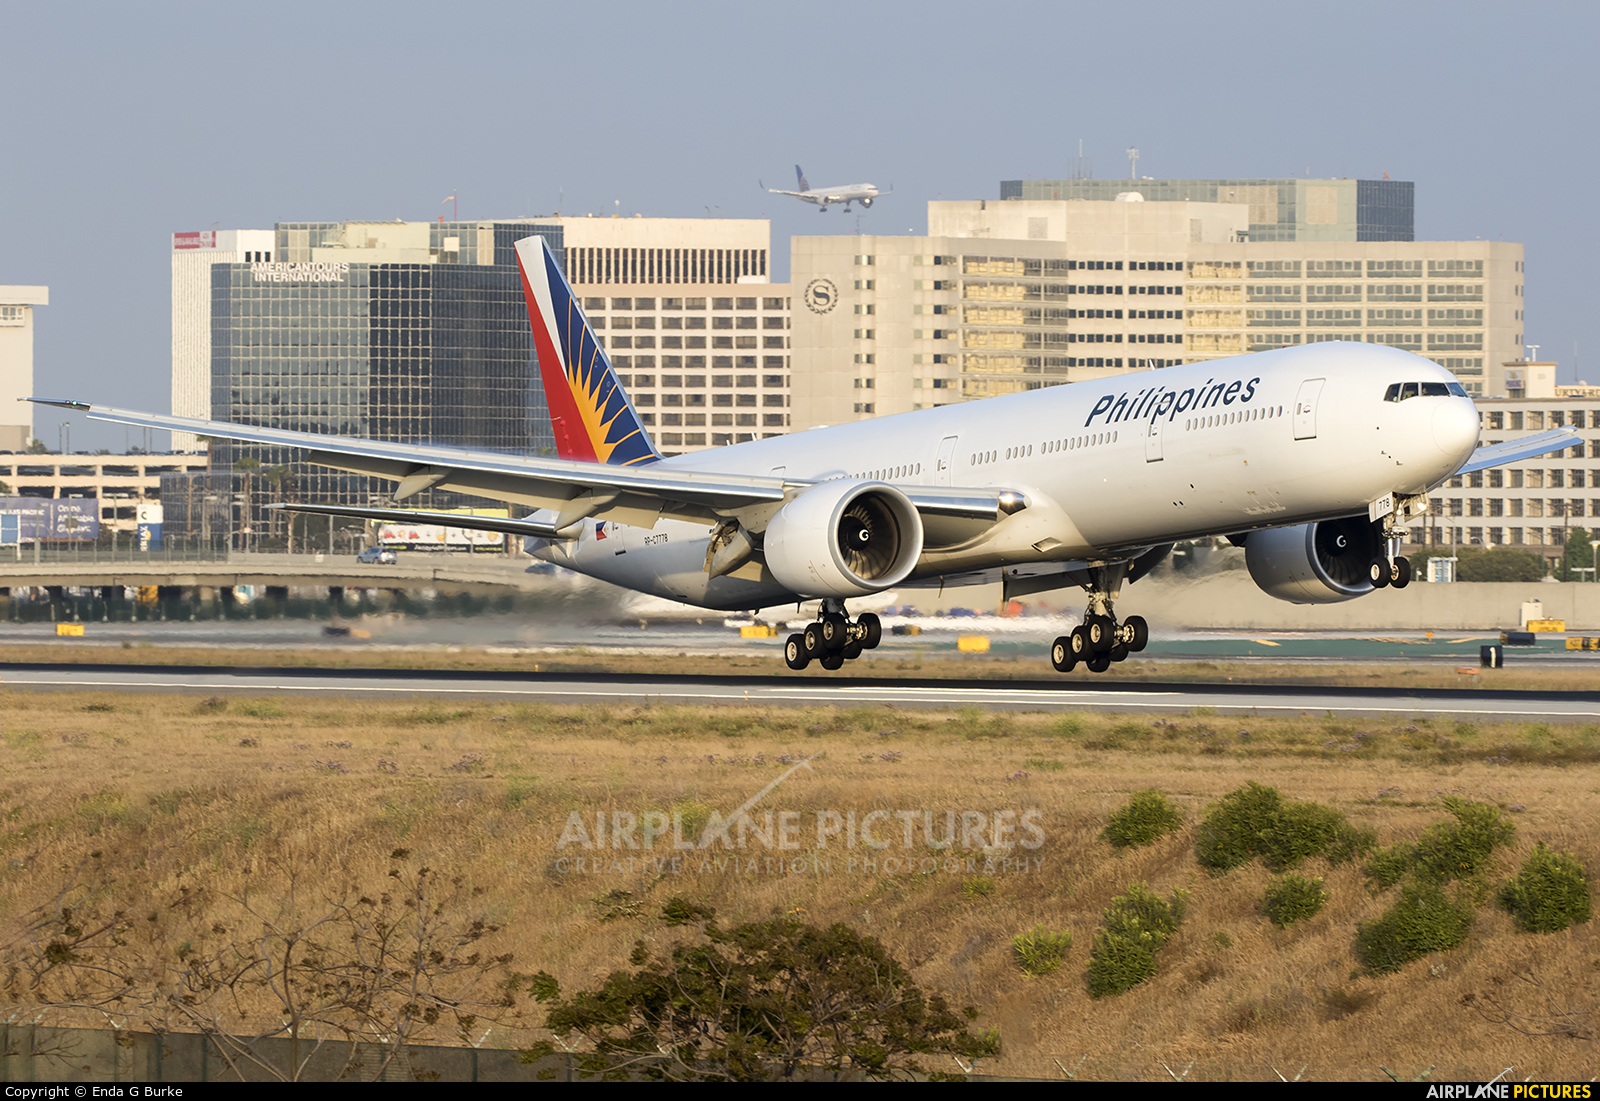 Philippines Airlines RP-C7778 aircraft at Los Angeles Intl